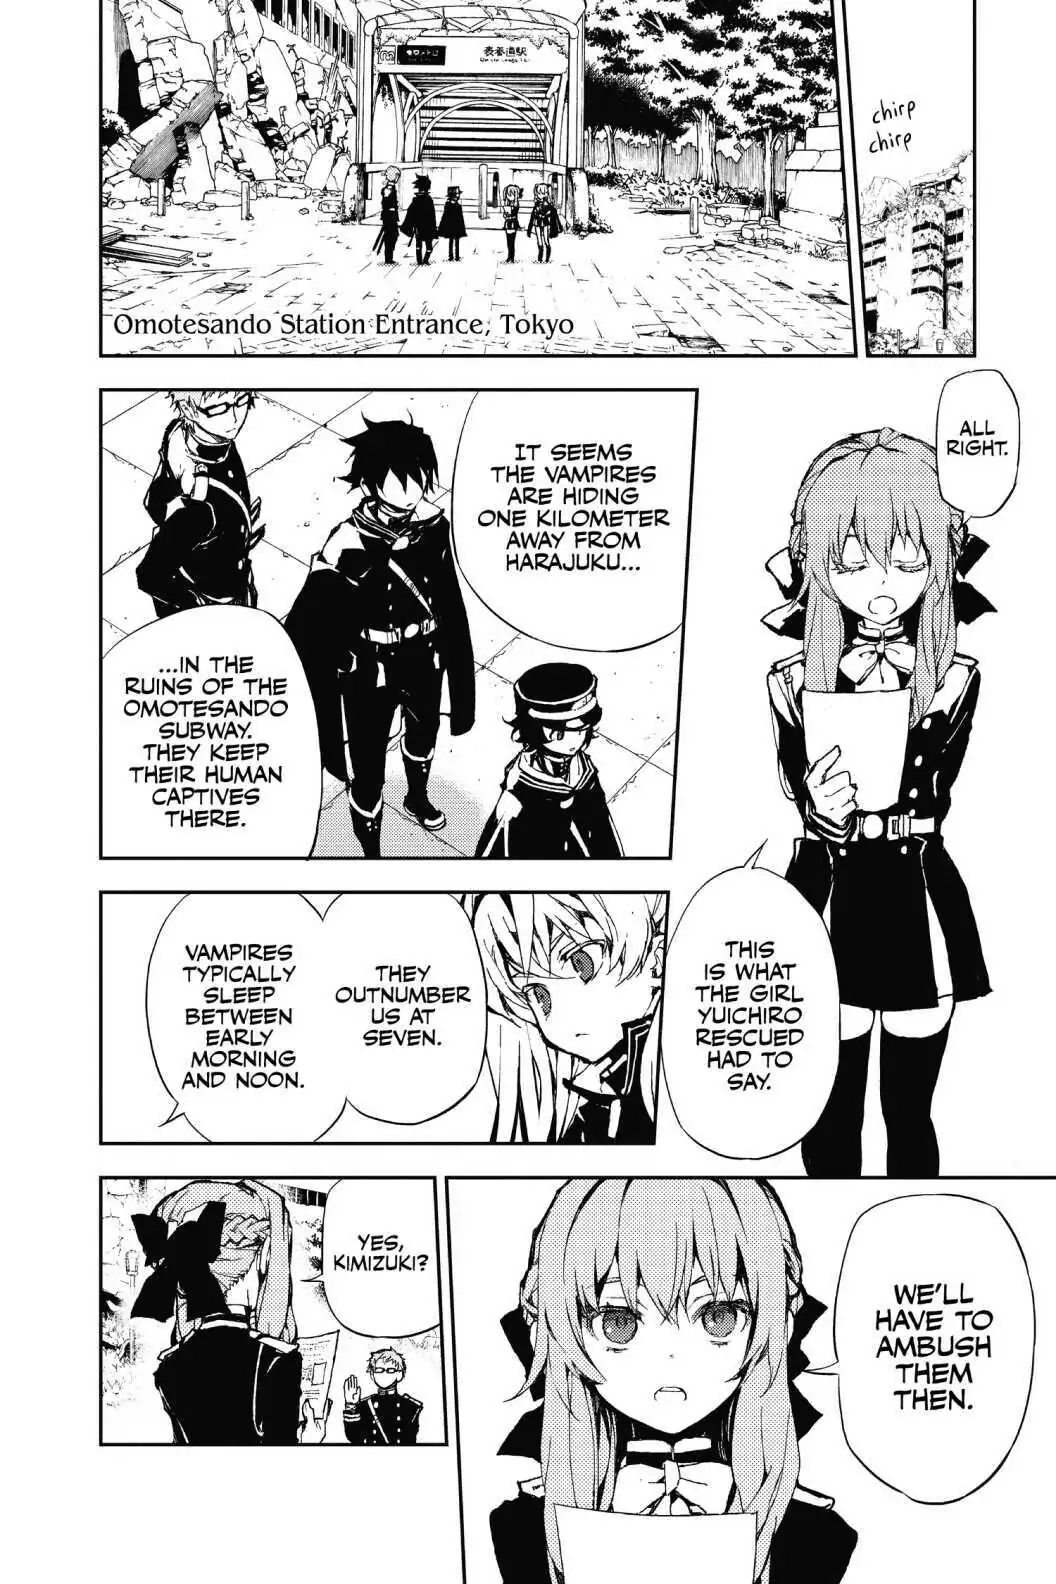 Seraph Of The End - 9 page 14-7d6614cf